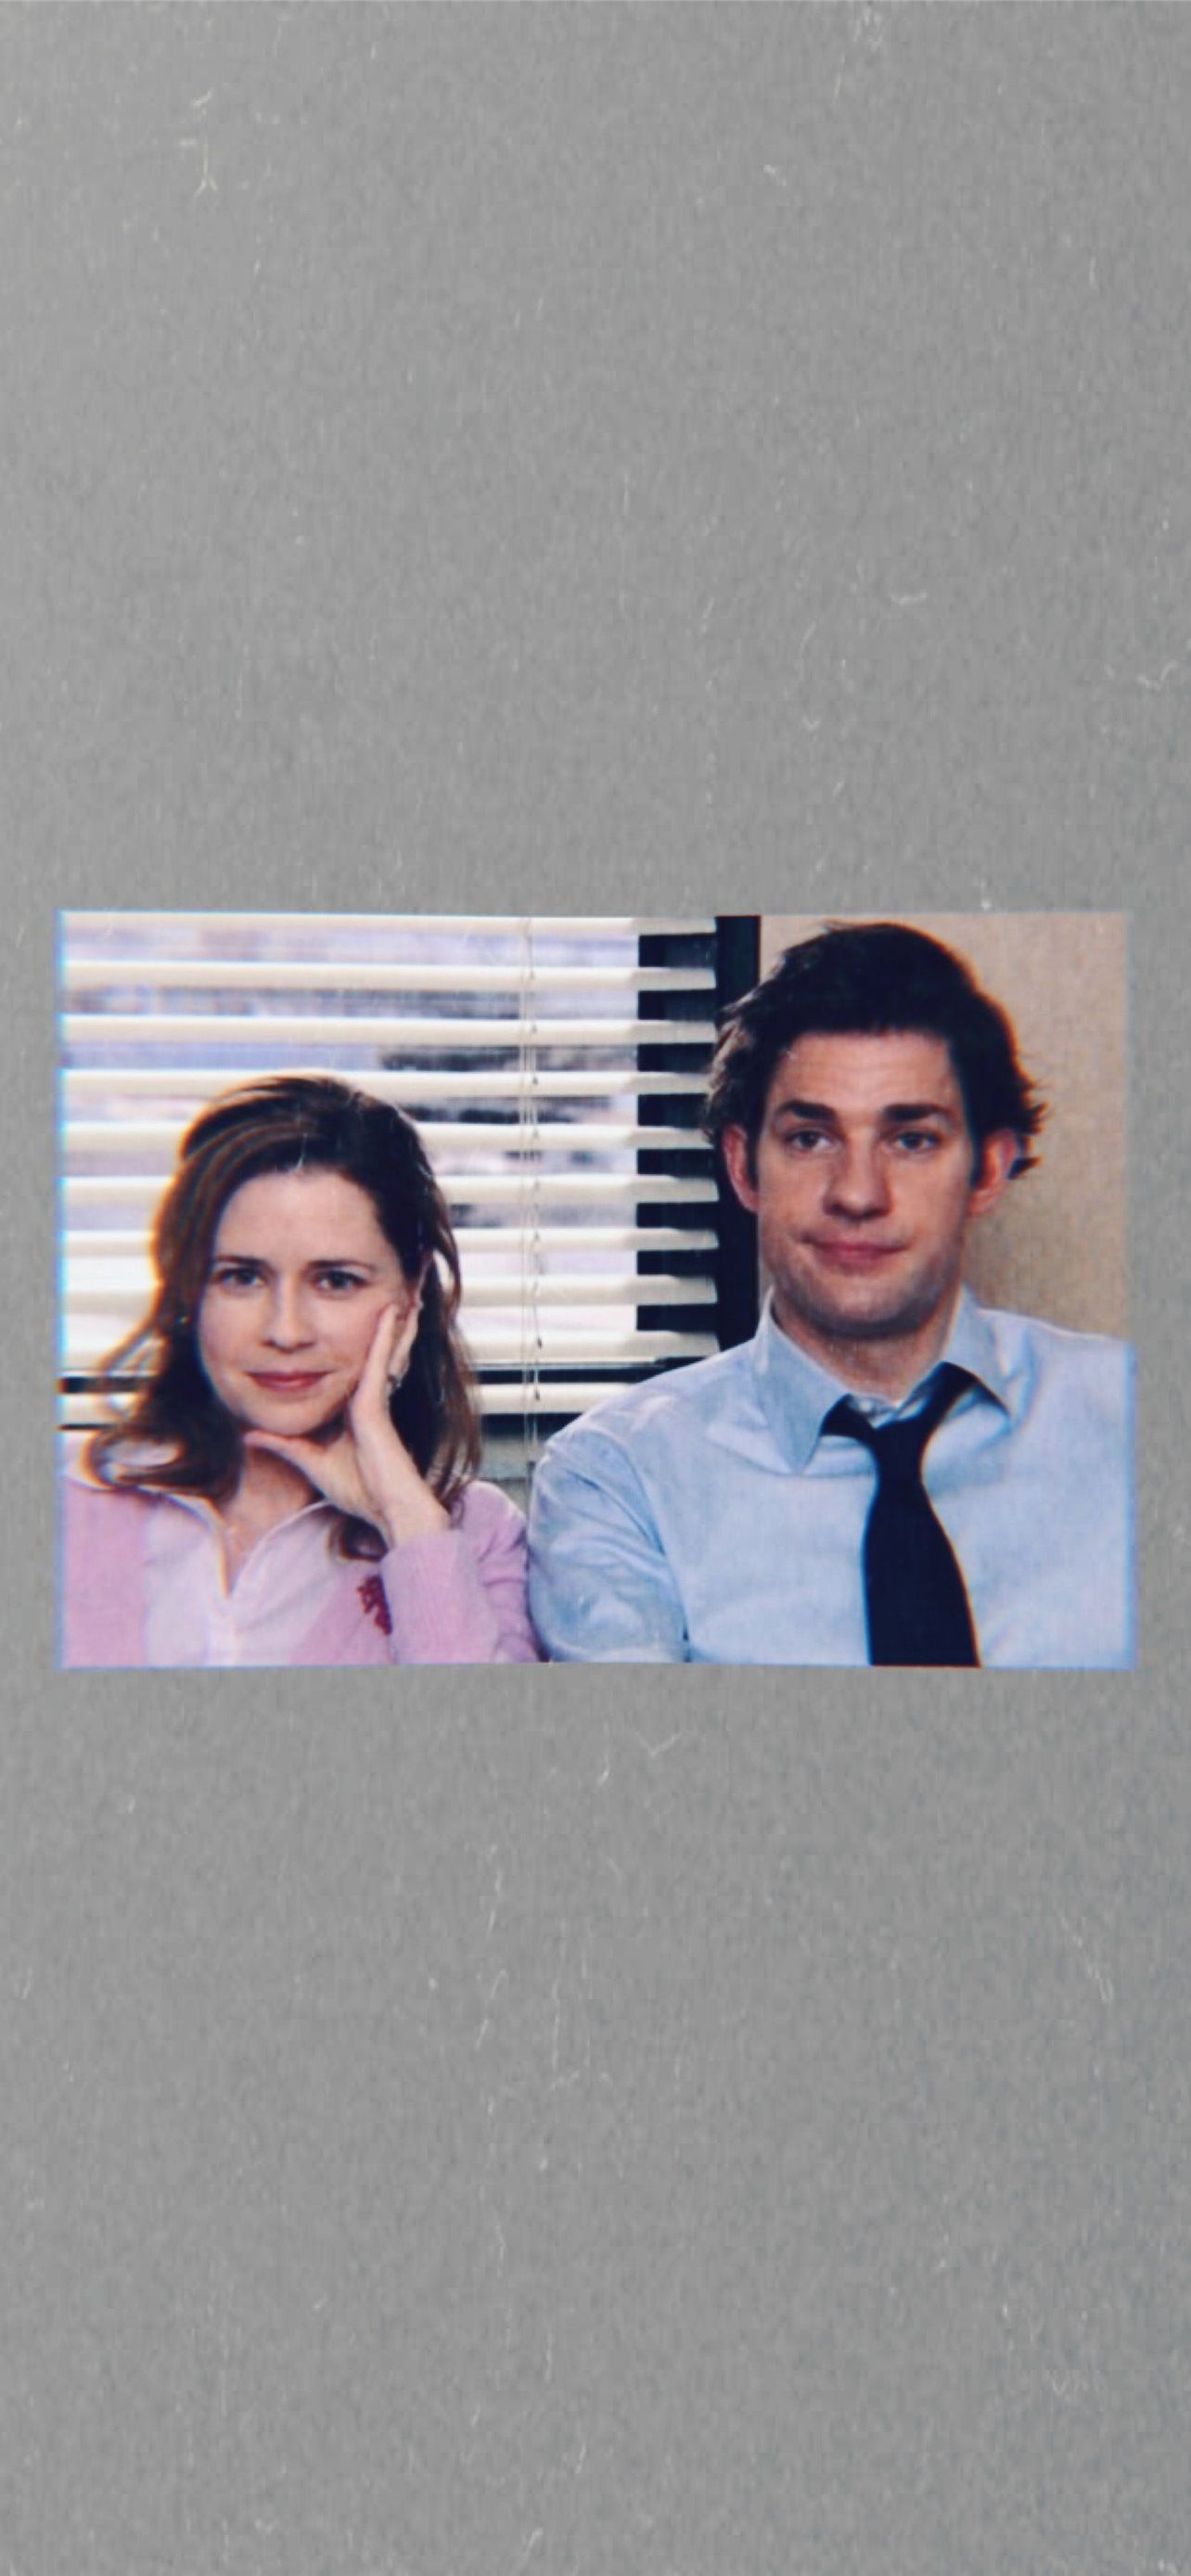 Jim and pam from the office wallpaper I made! - The Office